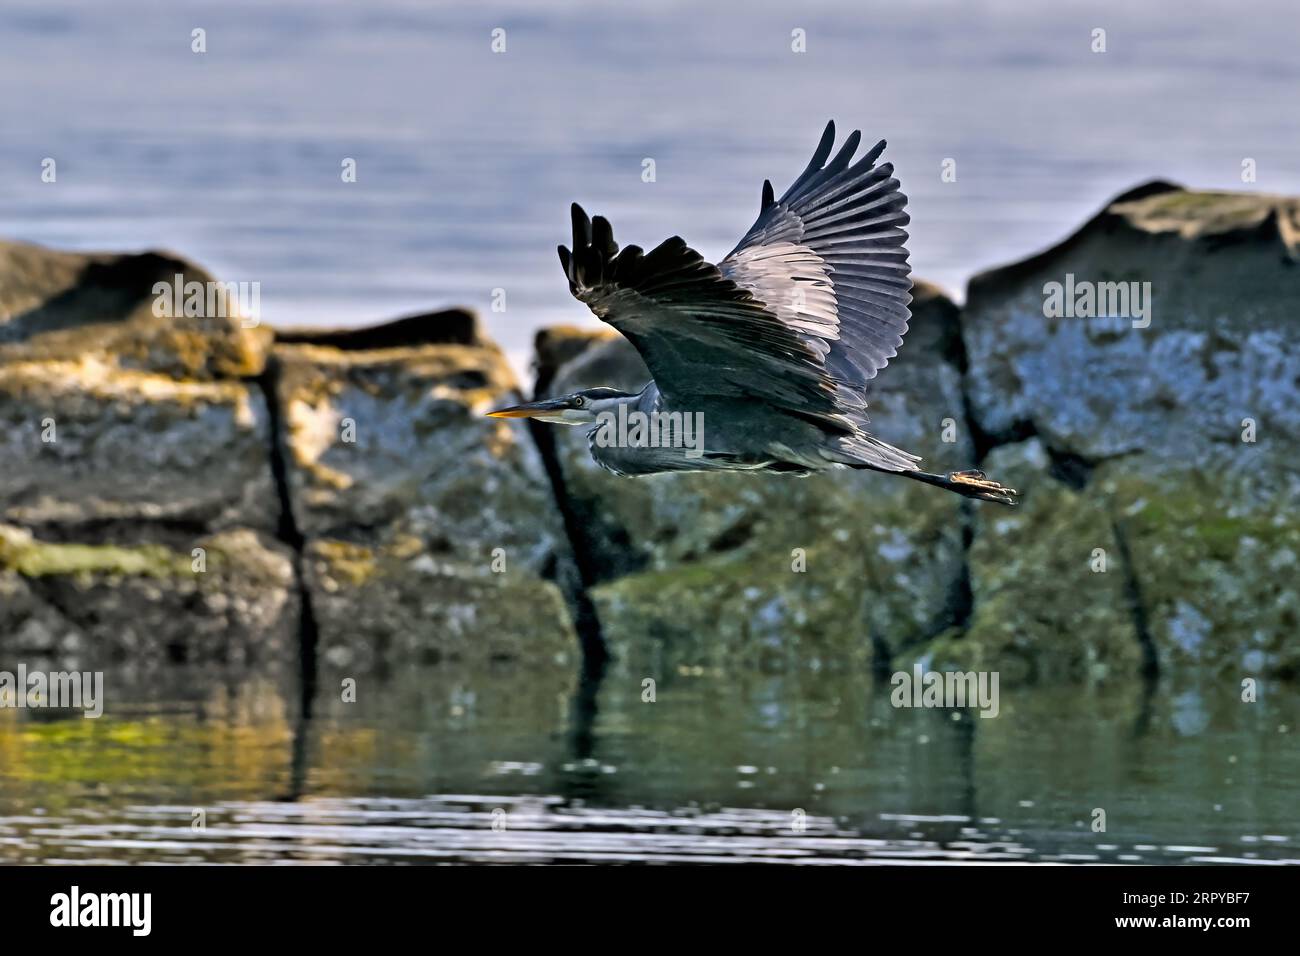 A Great Blue Heron (Ardea herodias), flying over water on the shore of Vancouver Island on British Columbia Canada Stock Photo